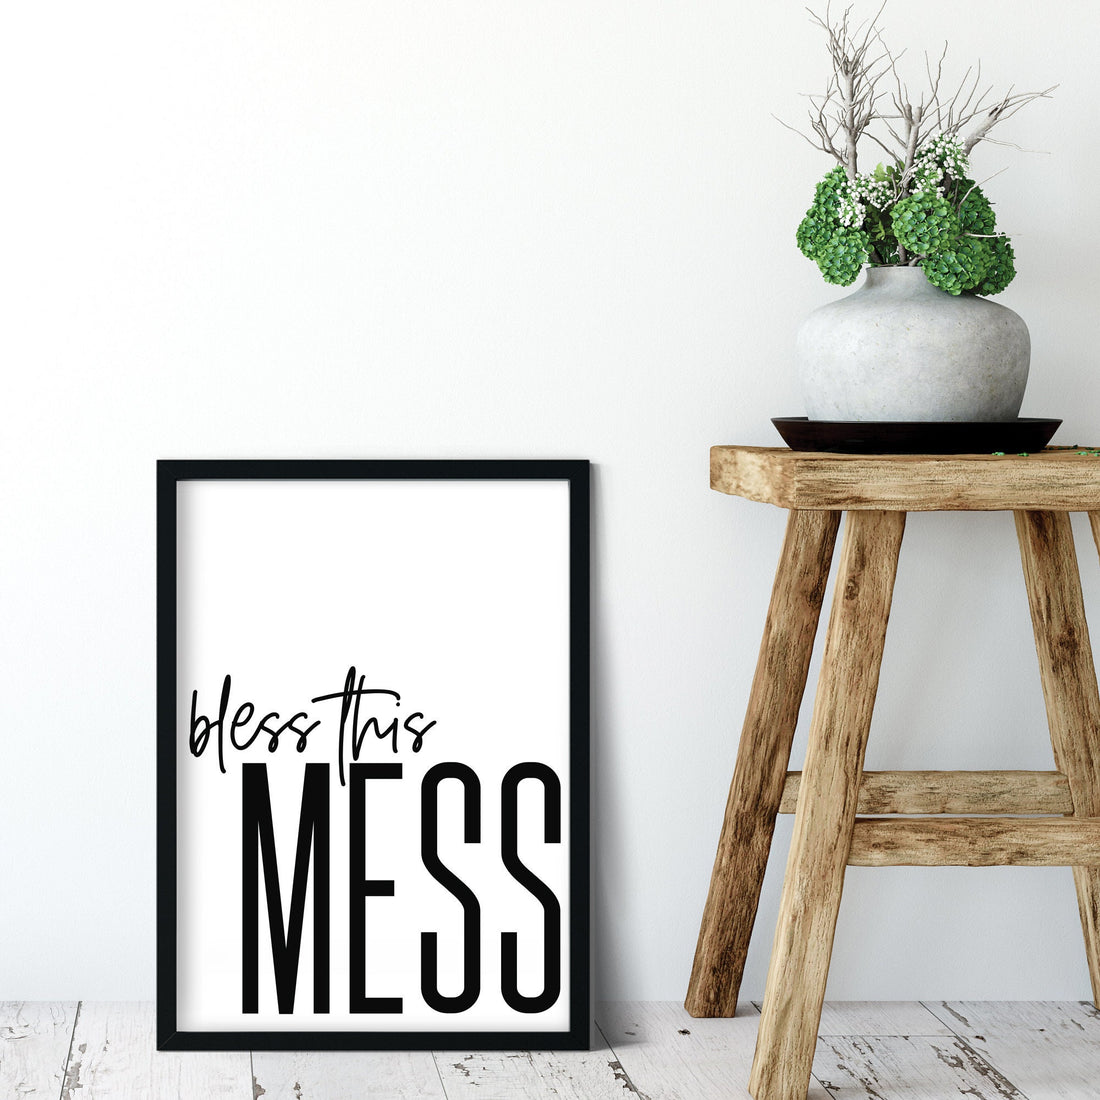 bless this mess Print